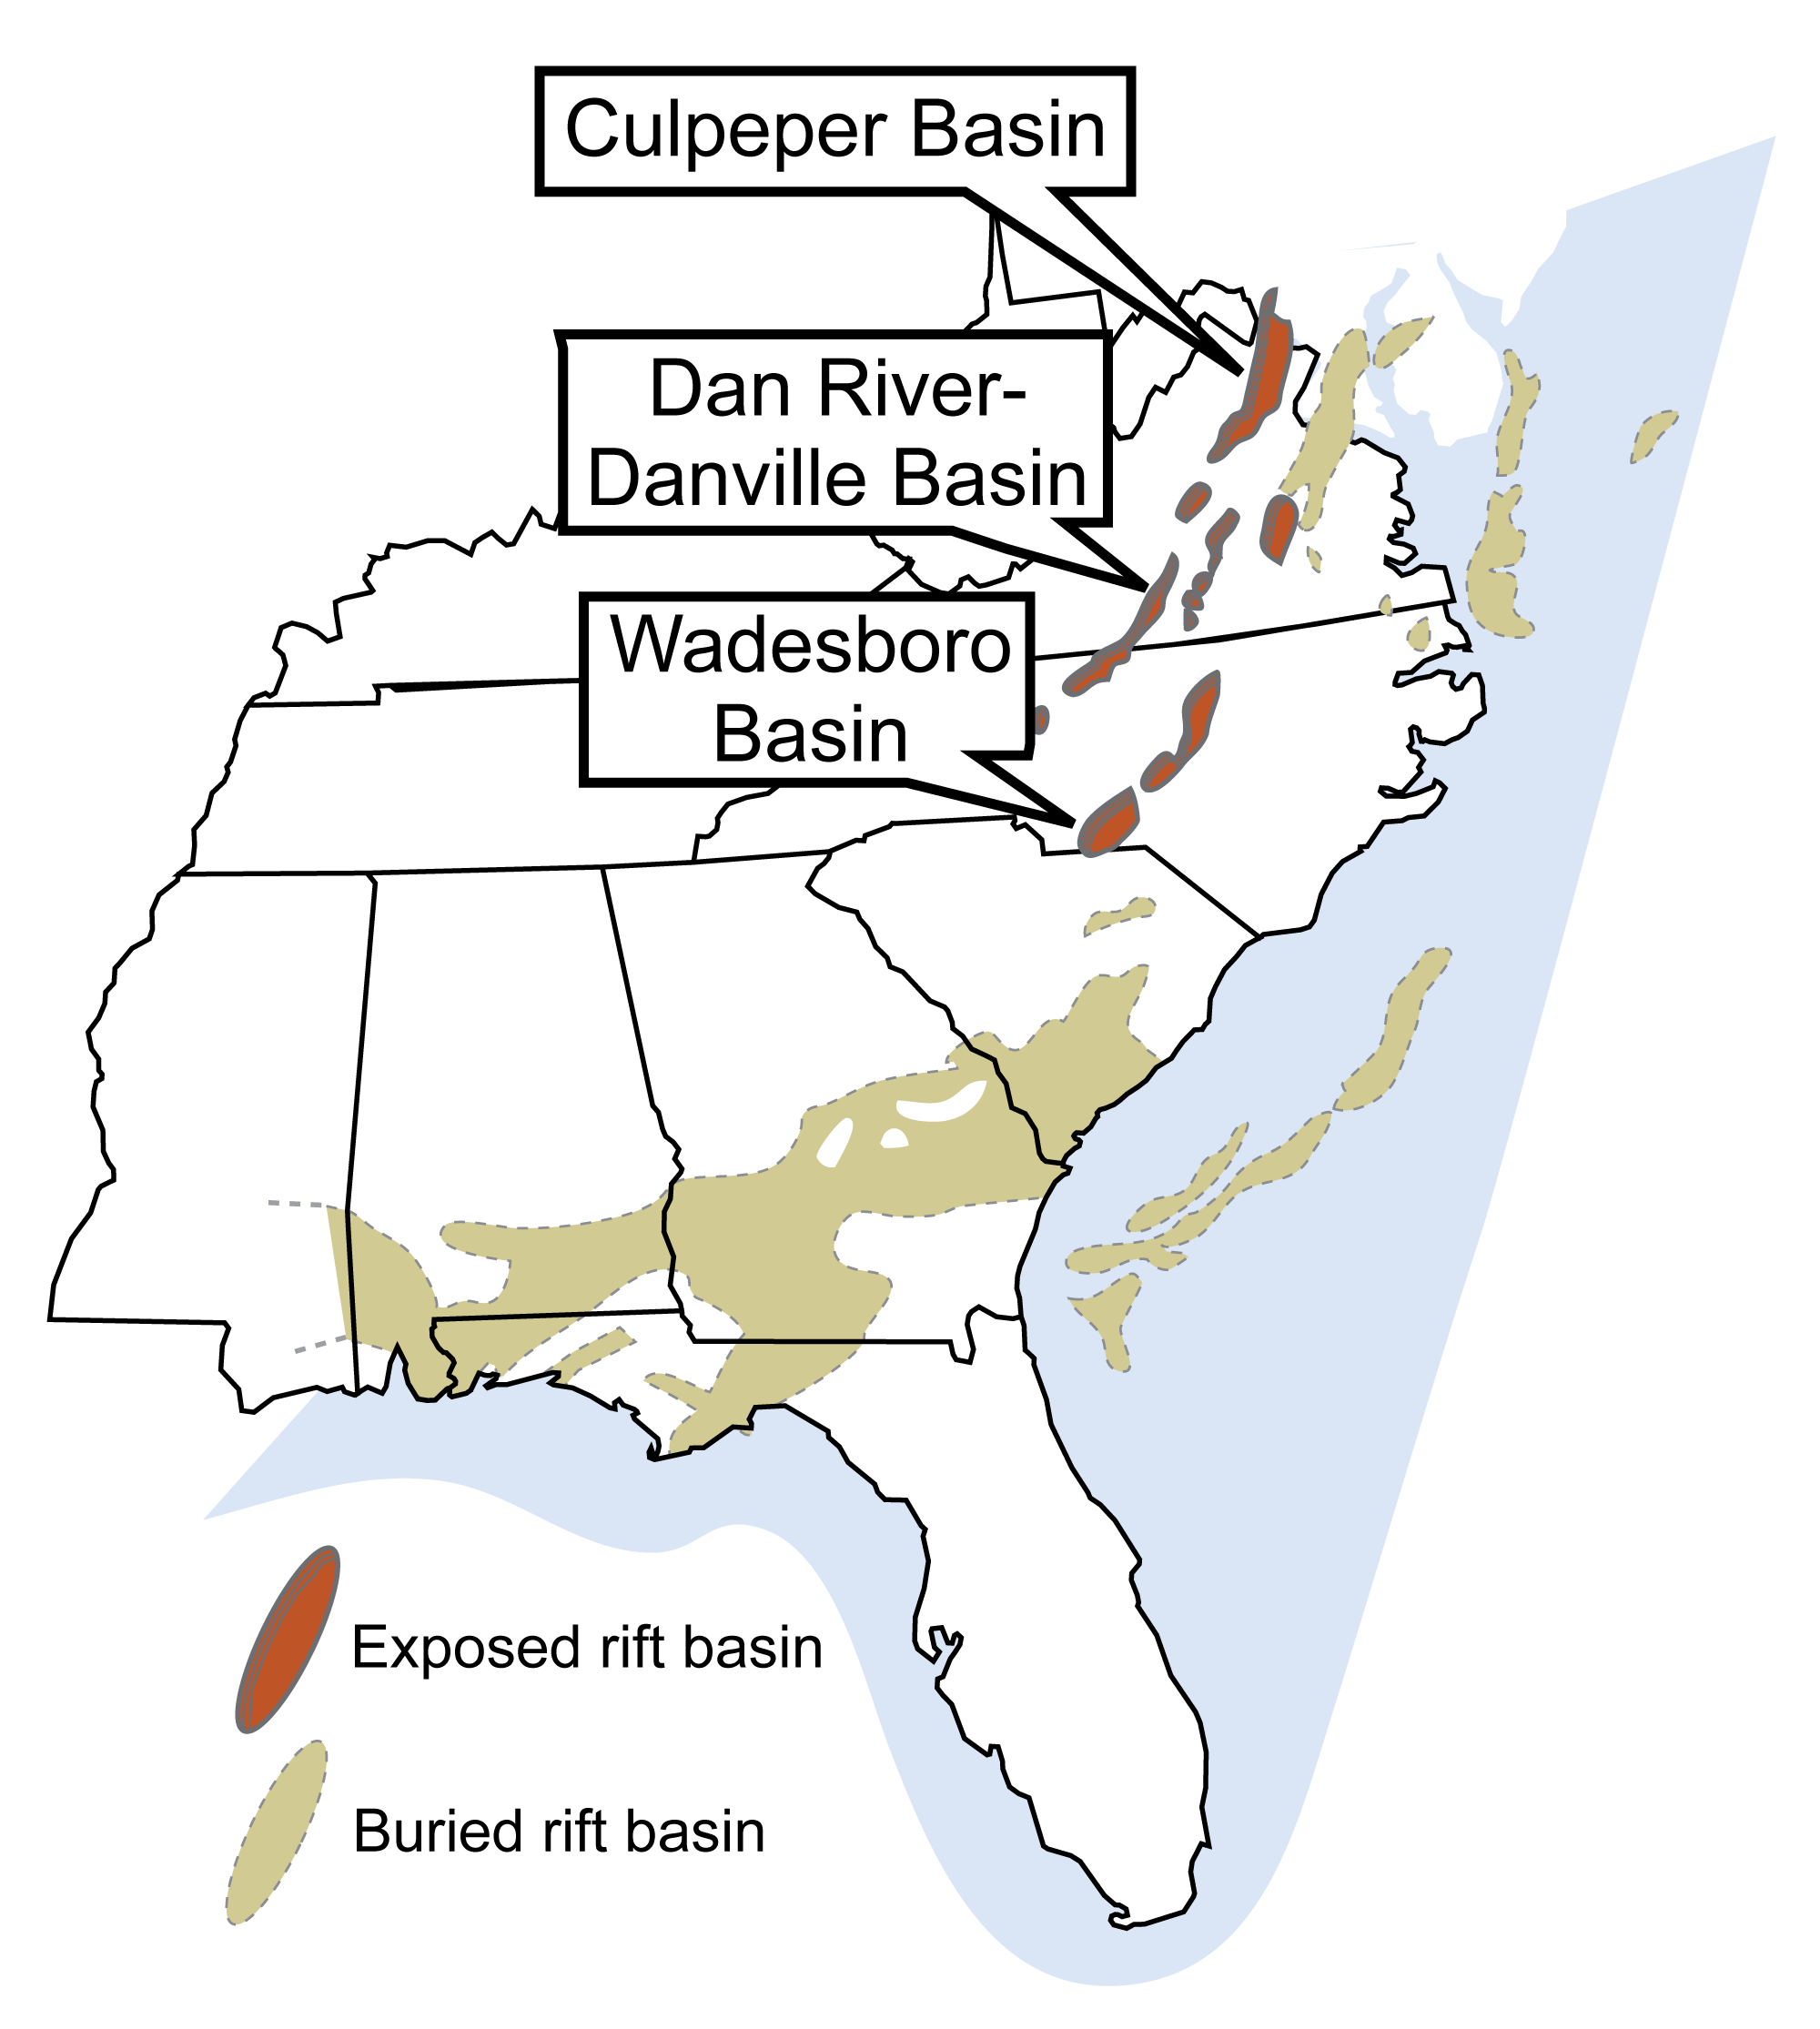 Map showing the locations of the Triassic and Jurassic rift basins in the southeastern United States, including deposits exposed at the surface and buried deposits.